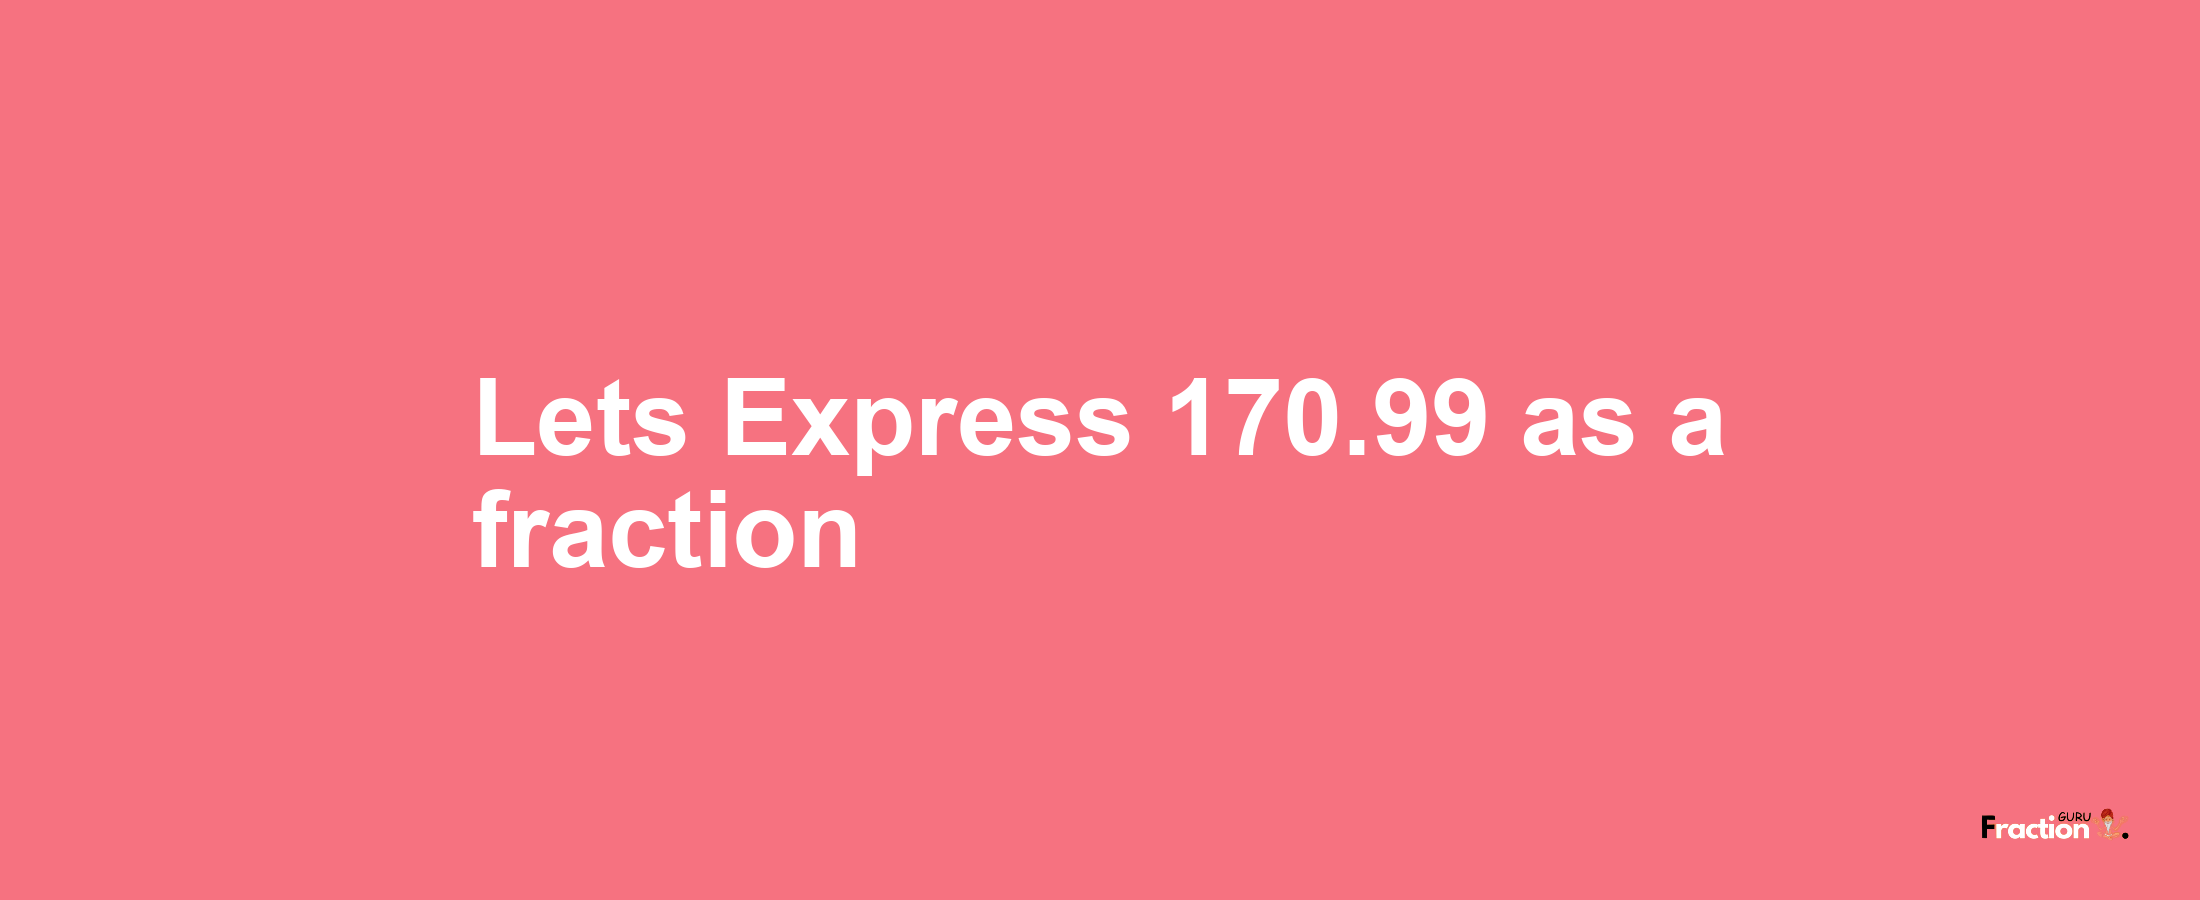 Lets Express 170.99 as afraction